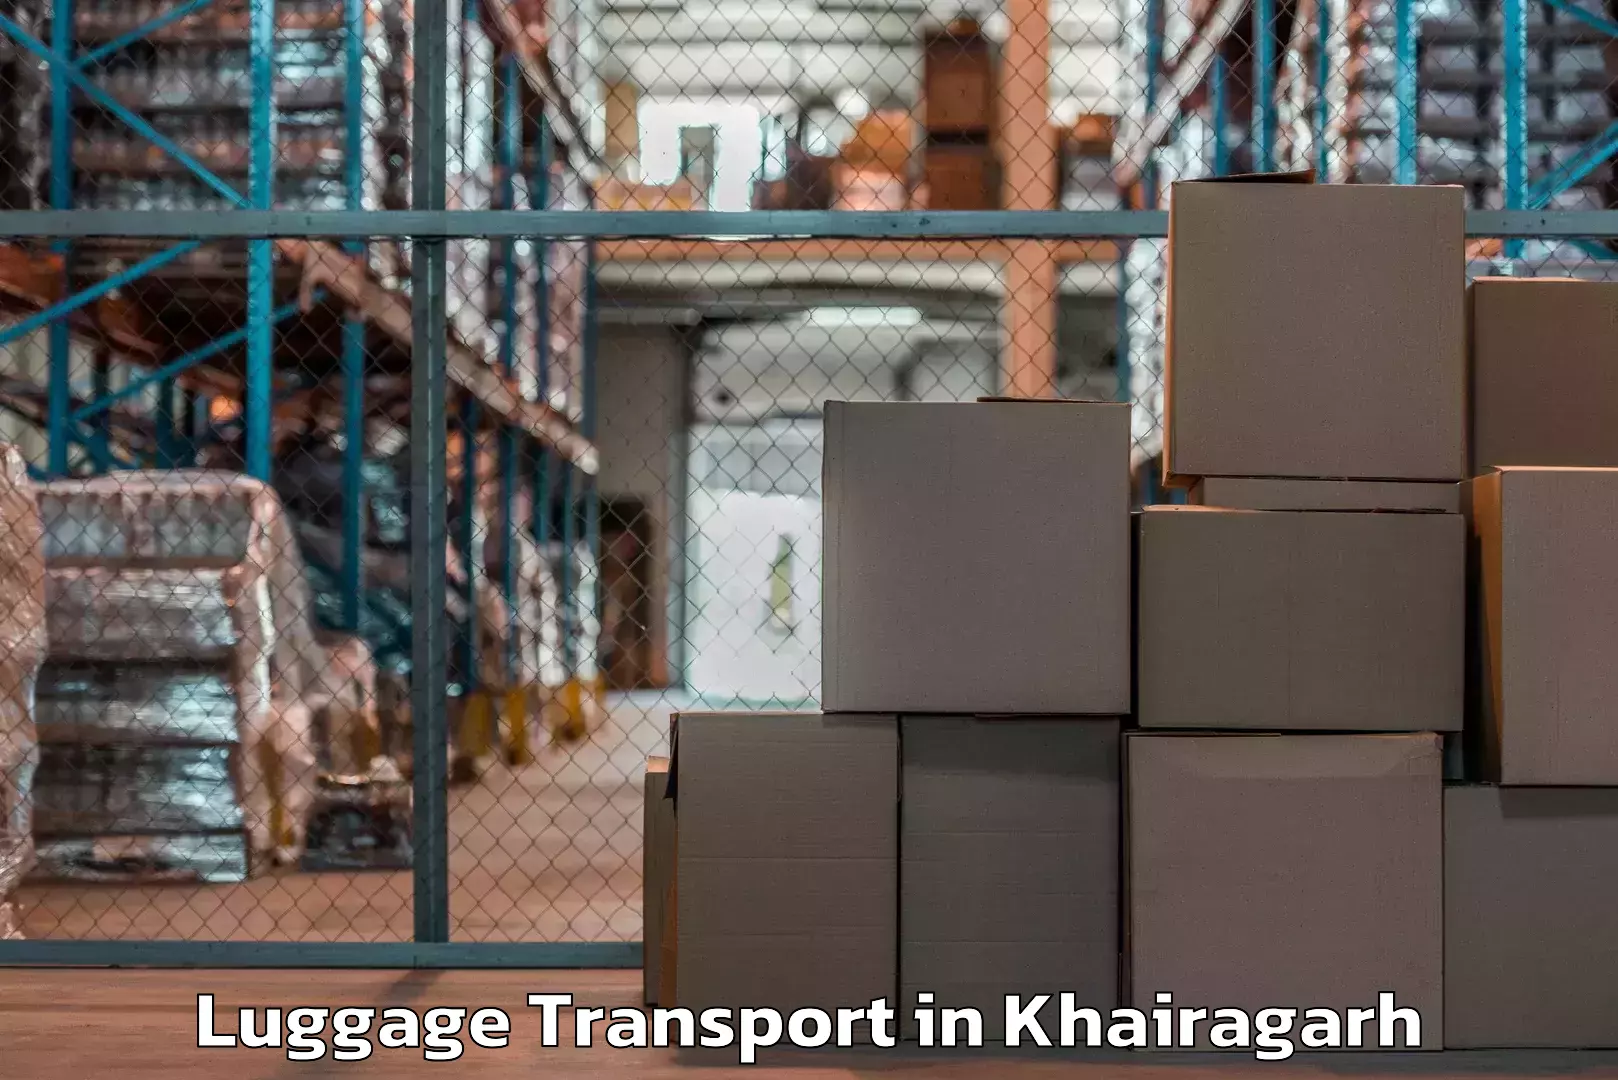 Hassle-free luggage shipping in Khairagarh